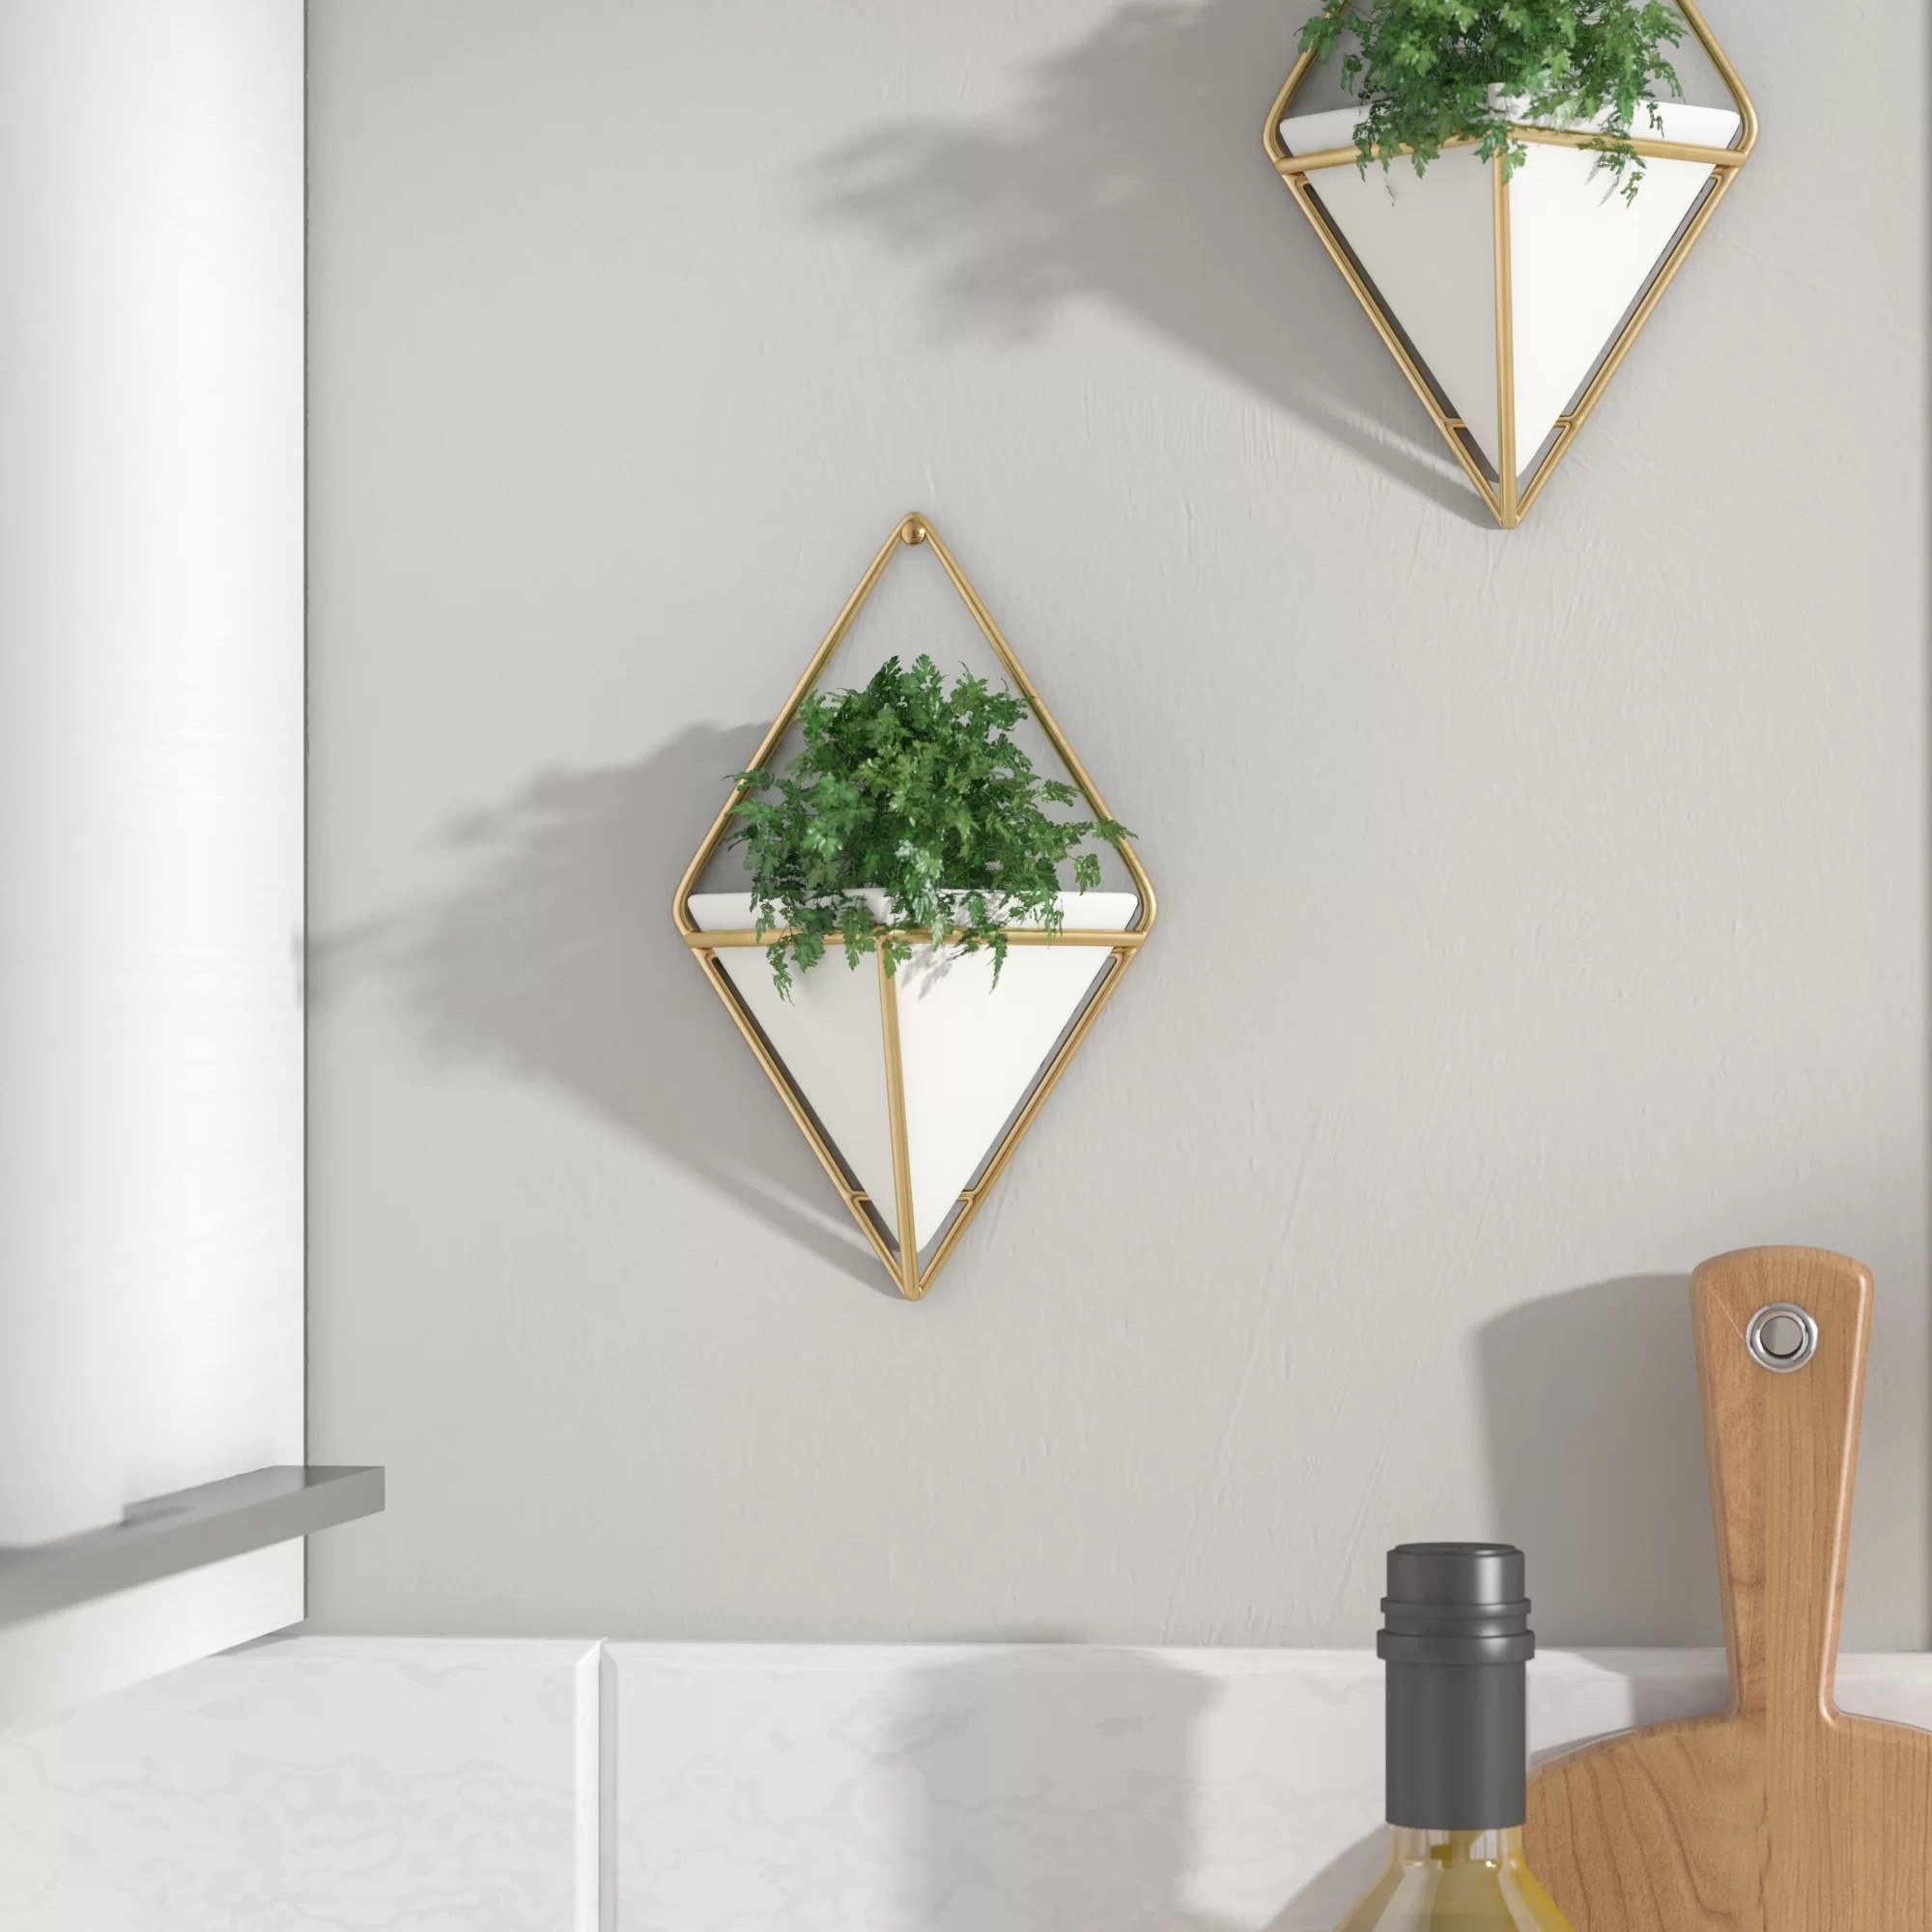 two floating wall plants